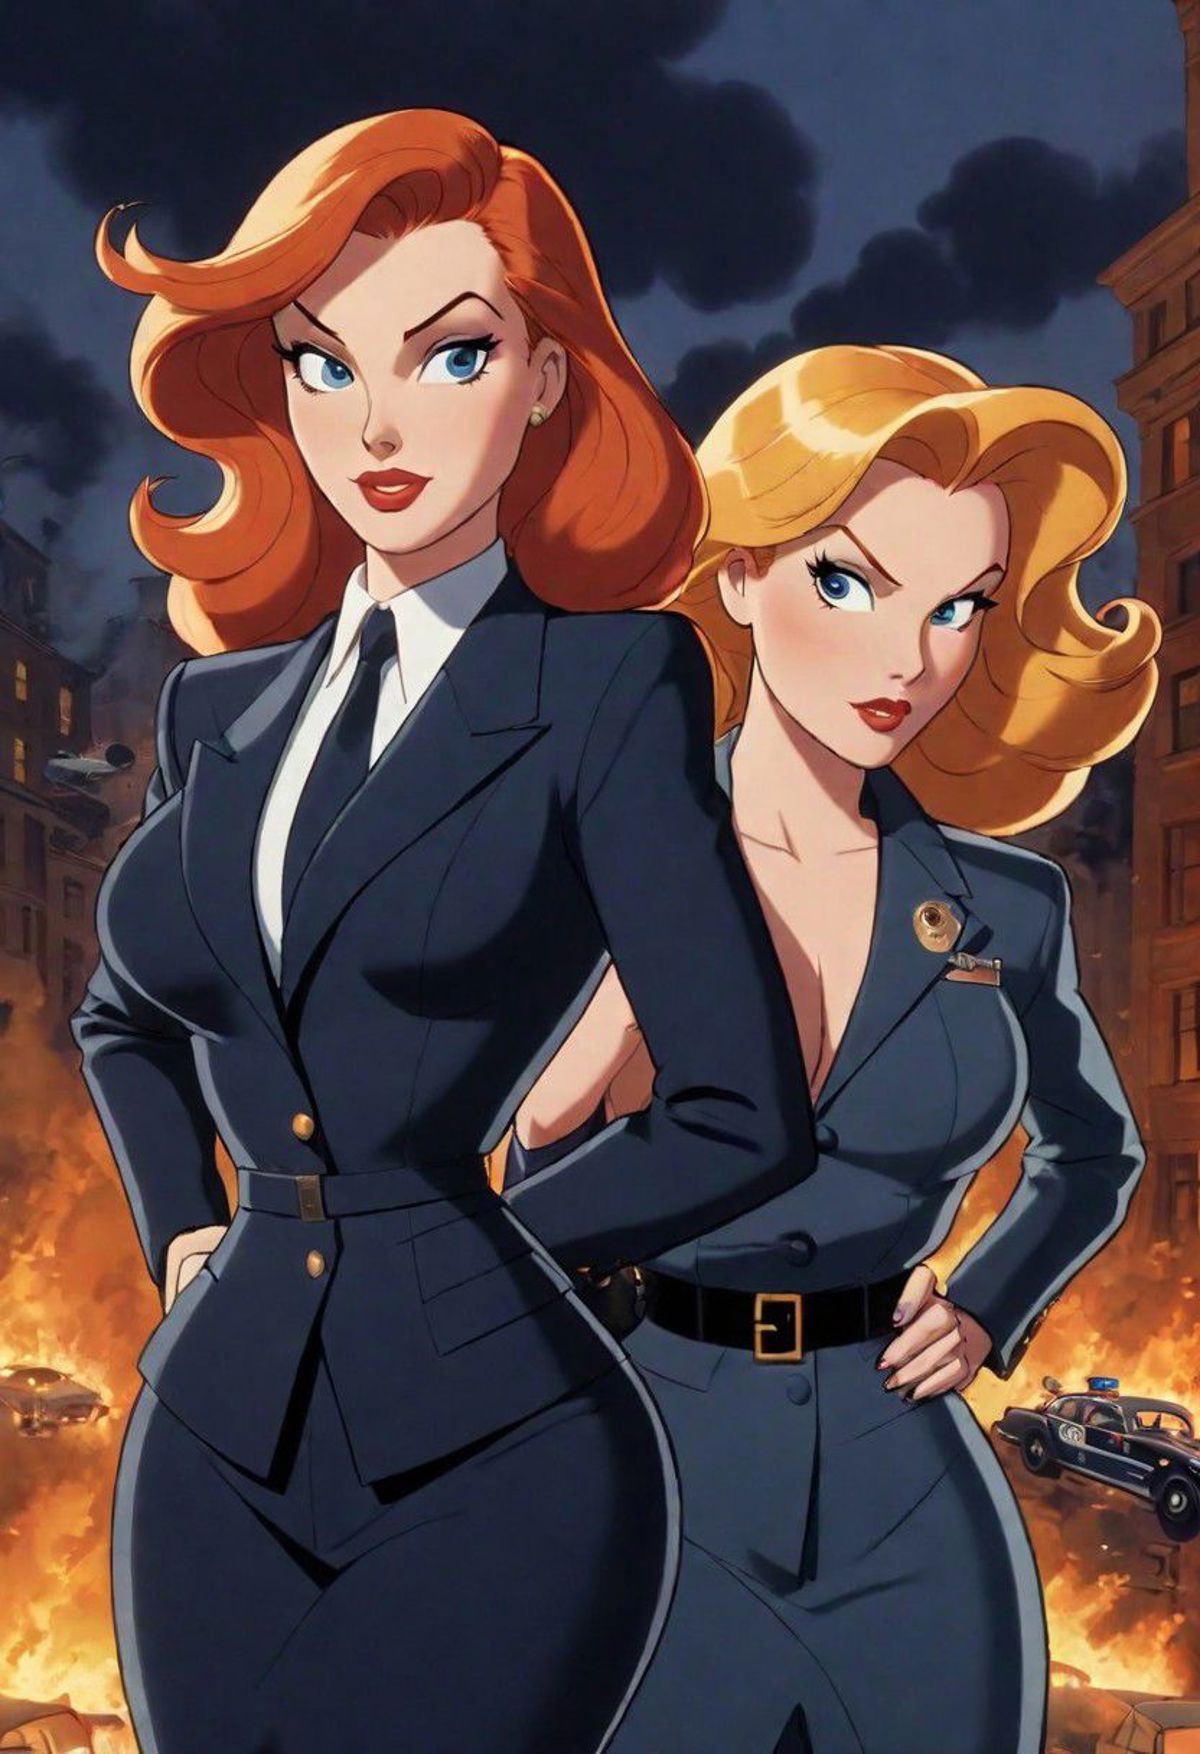 Two Cartoon Character Women in Uniforms, One with a Tie, and One with a Pin-up Look, Standing Together.